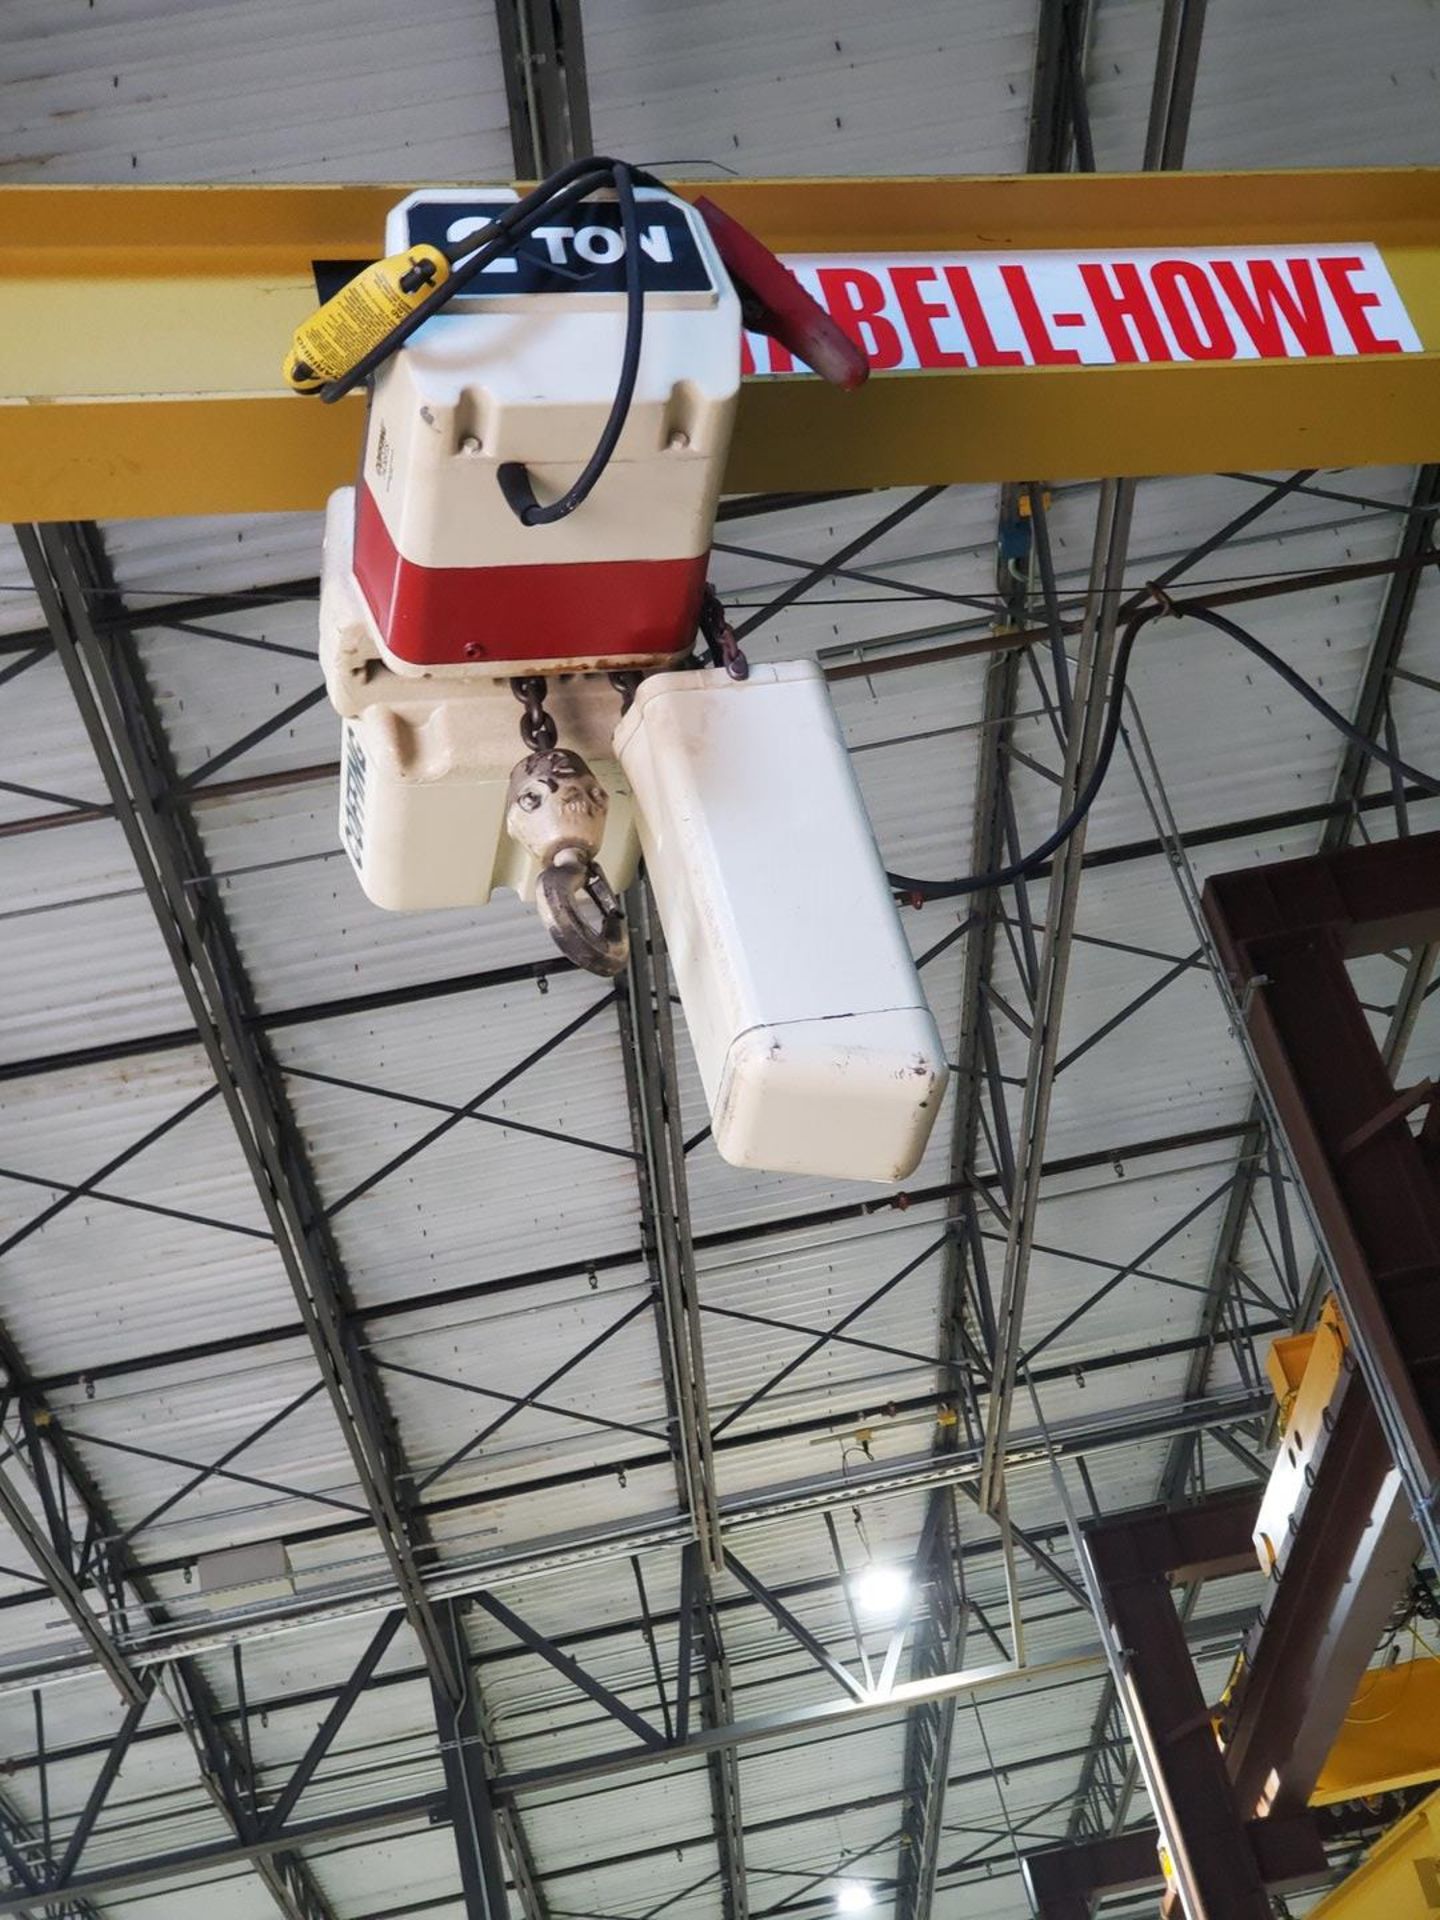 Abbell Howe Wall Mounted 2 Ton Jib Crane w/ 2-Ton Coffing Hoist & 2-Button Pendant - Image 11 of 13